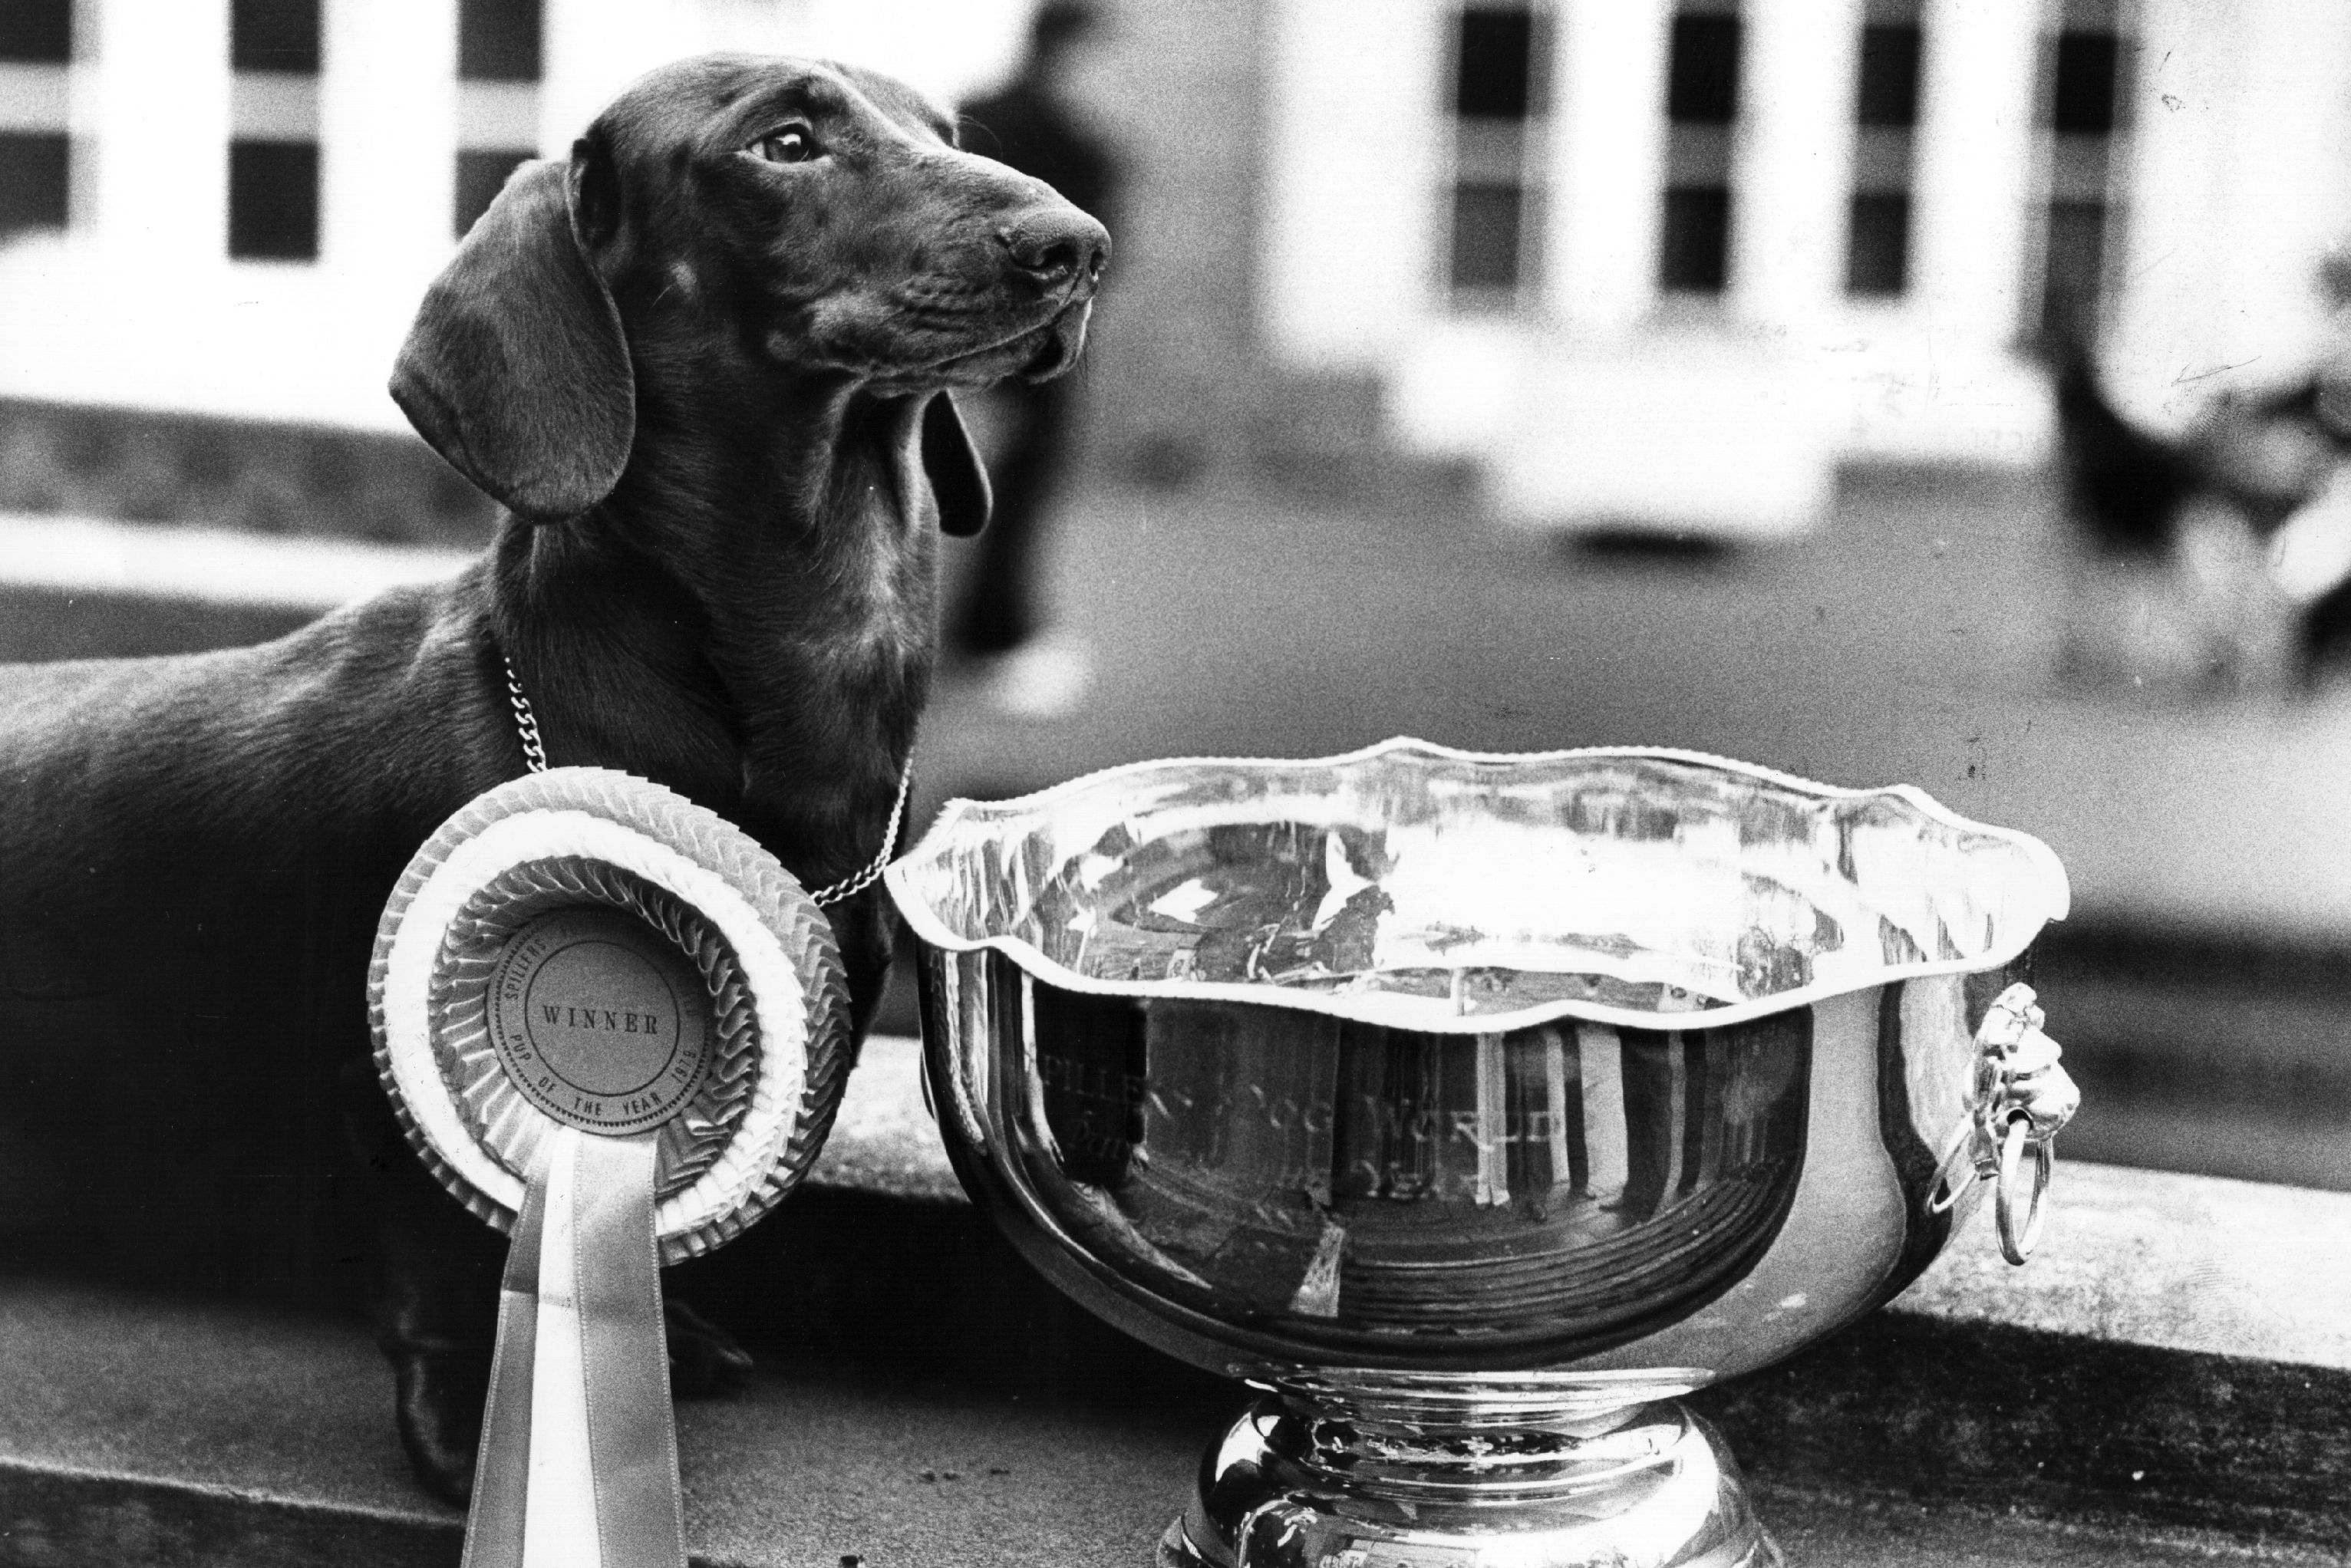 The 'Pup of the Year', a dachshund named Simon, with his trophy at London Zoo, 1979.